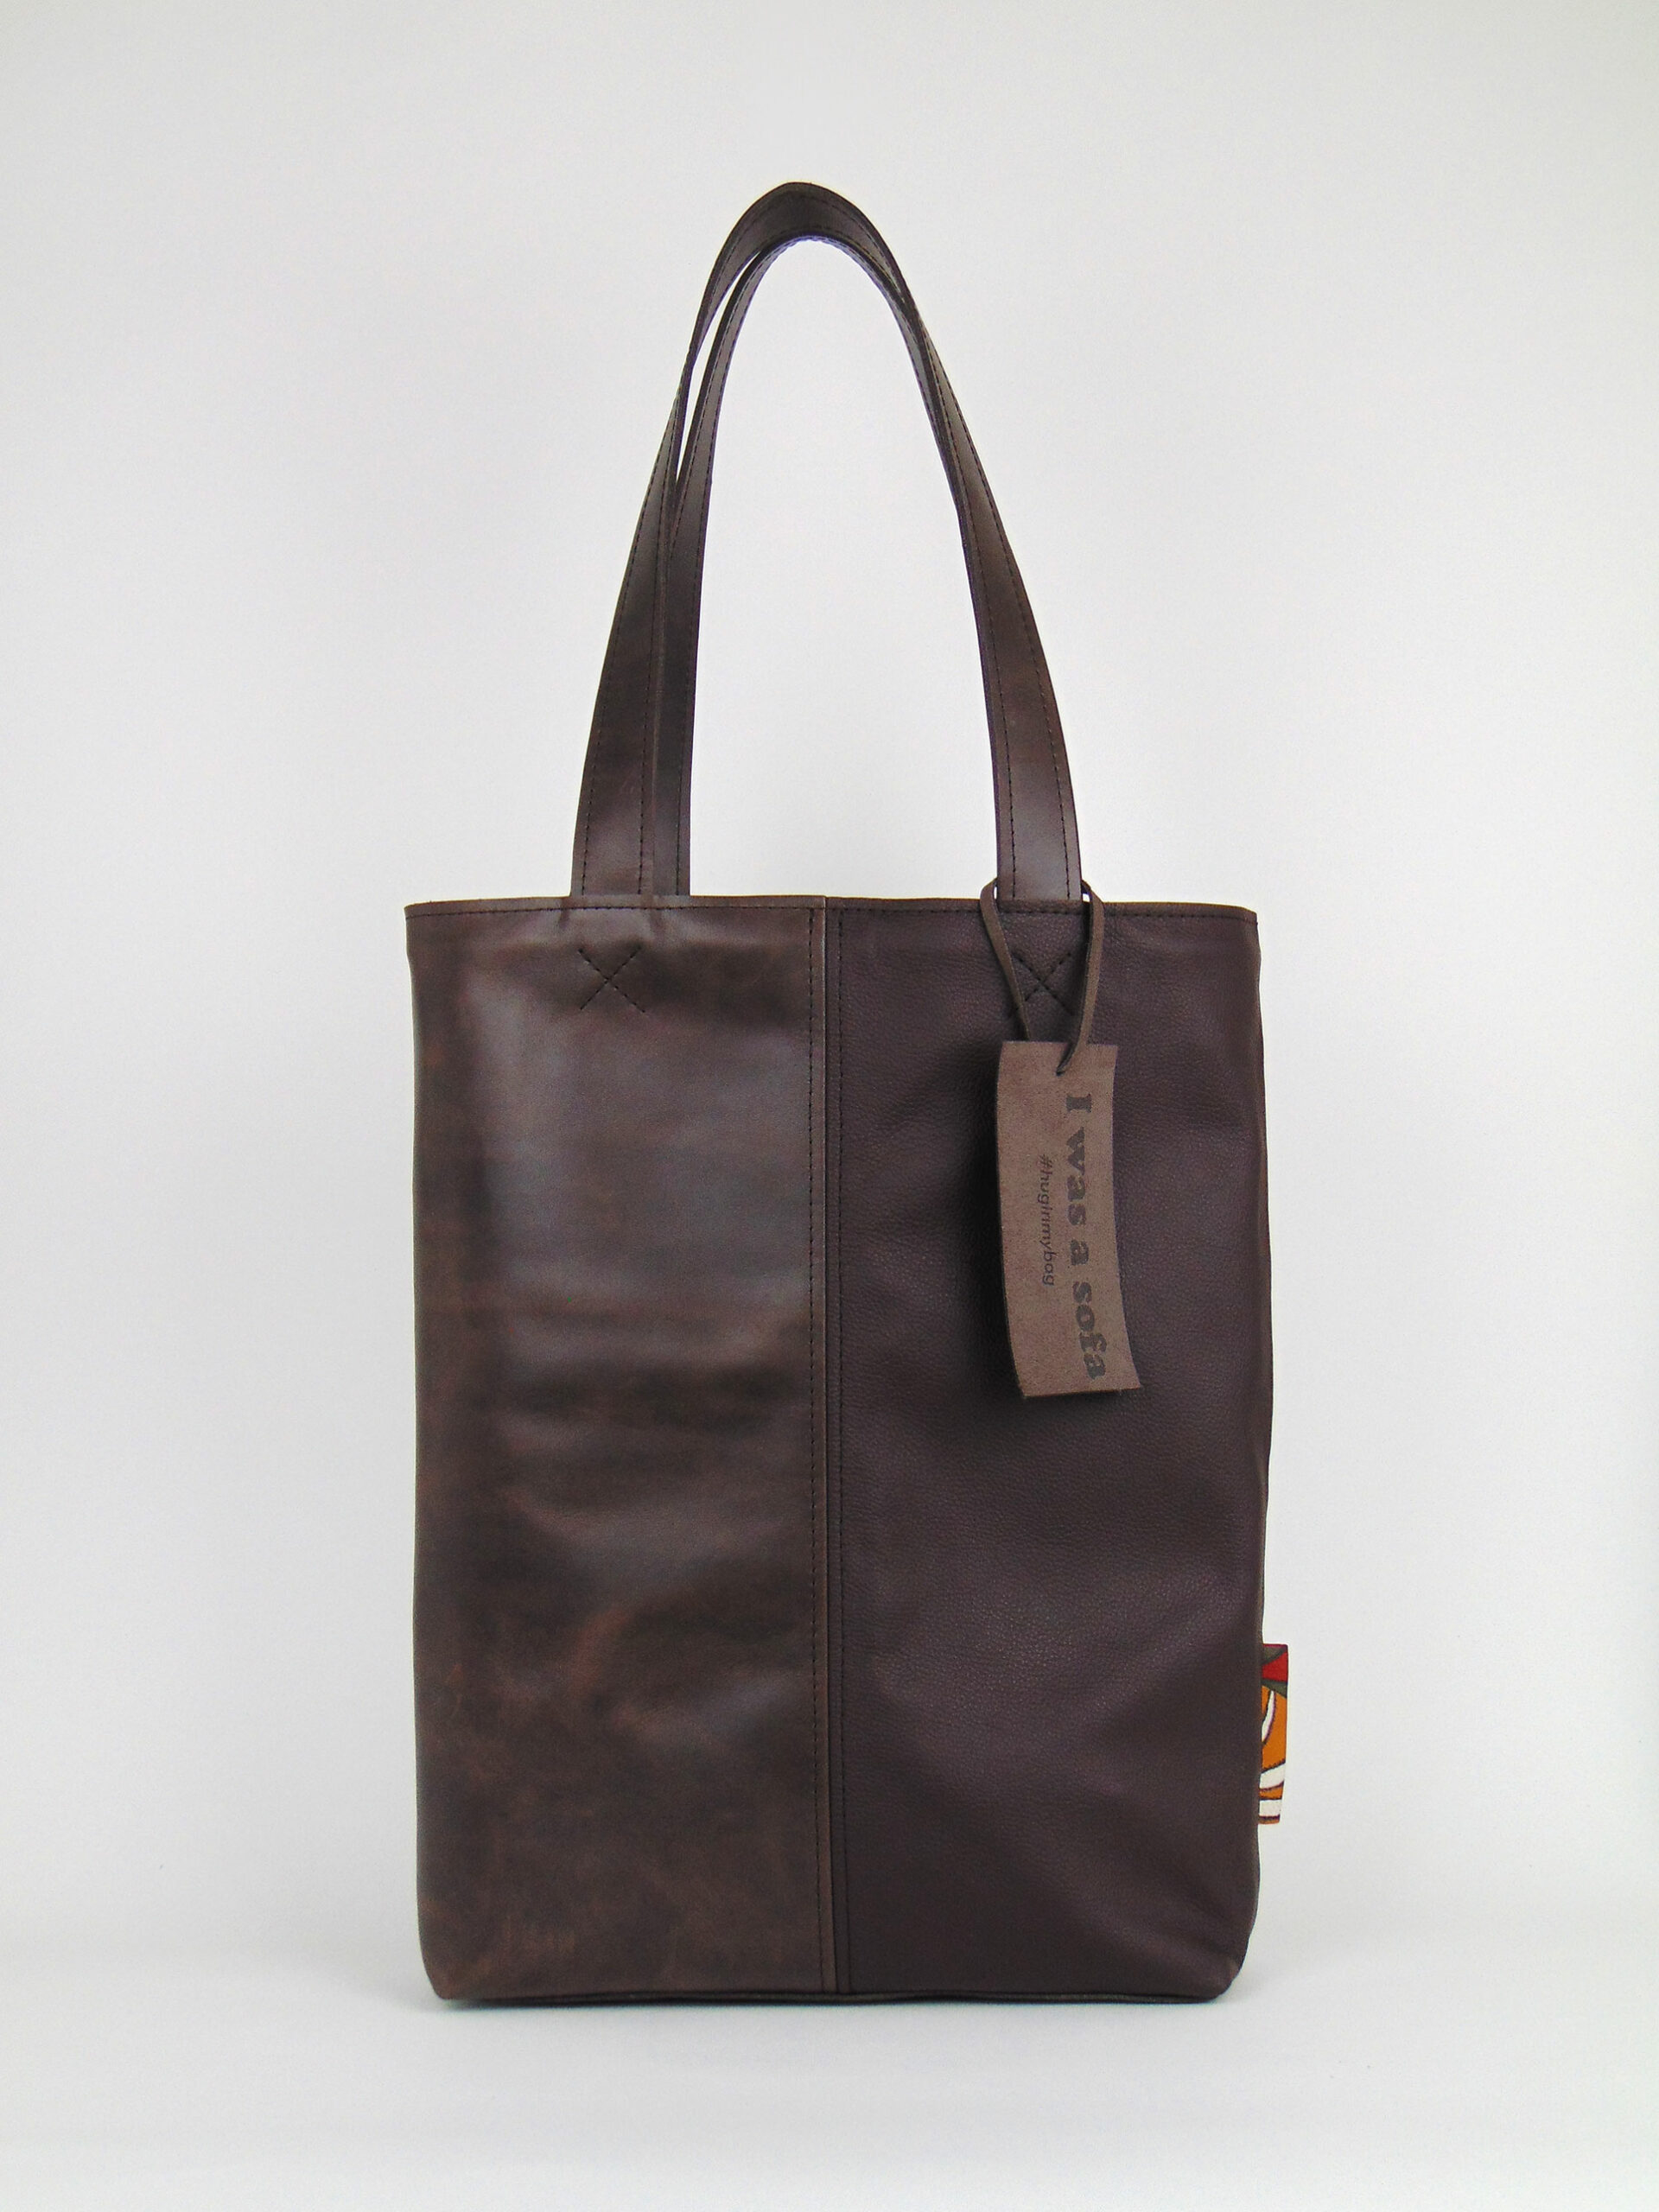 Product image of the shopper named Forest Walk. This shopper is made from recycled leather in a colour combination of two different brown tones.